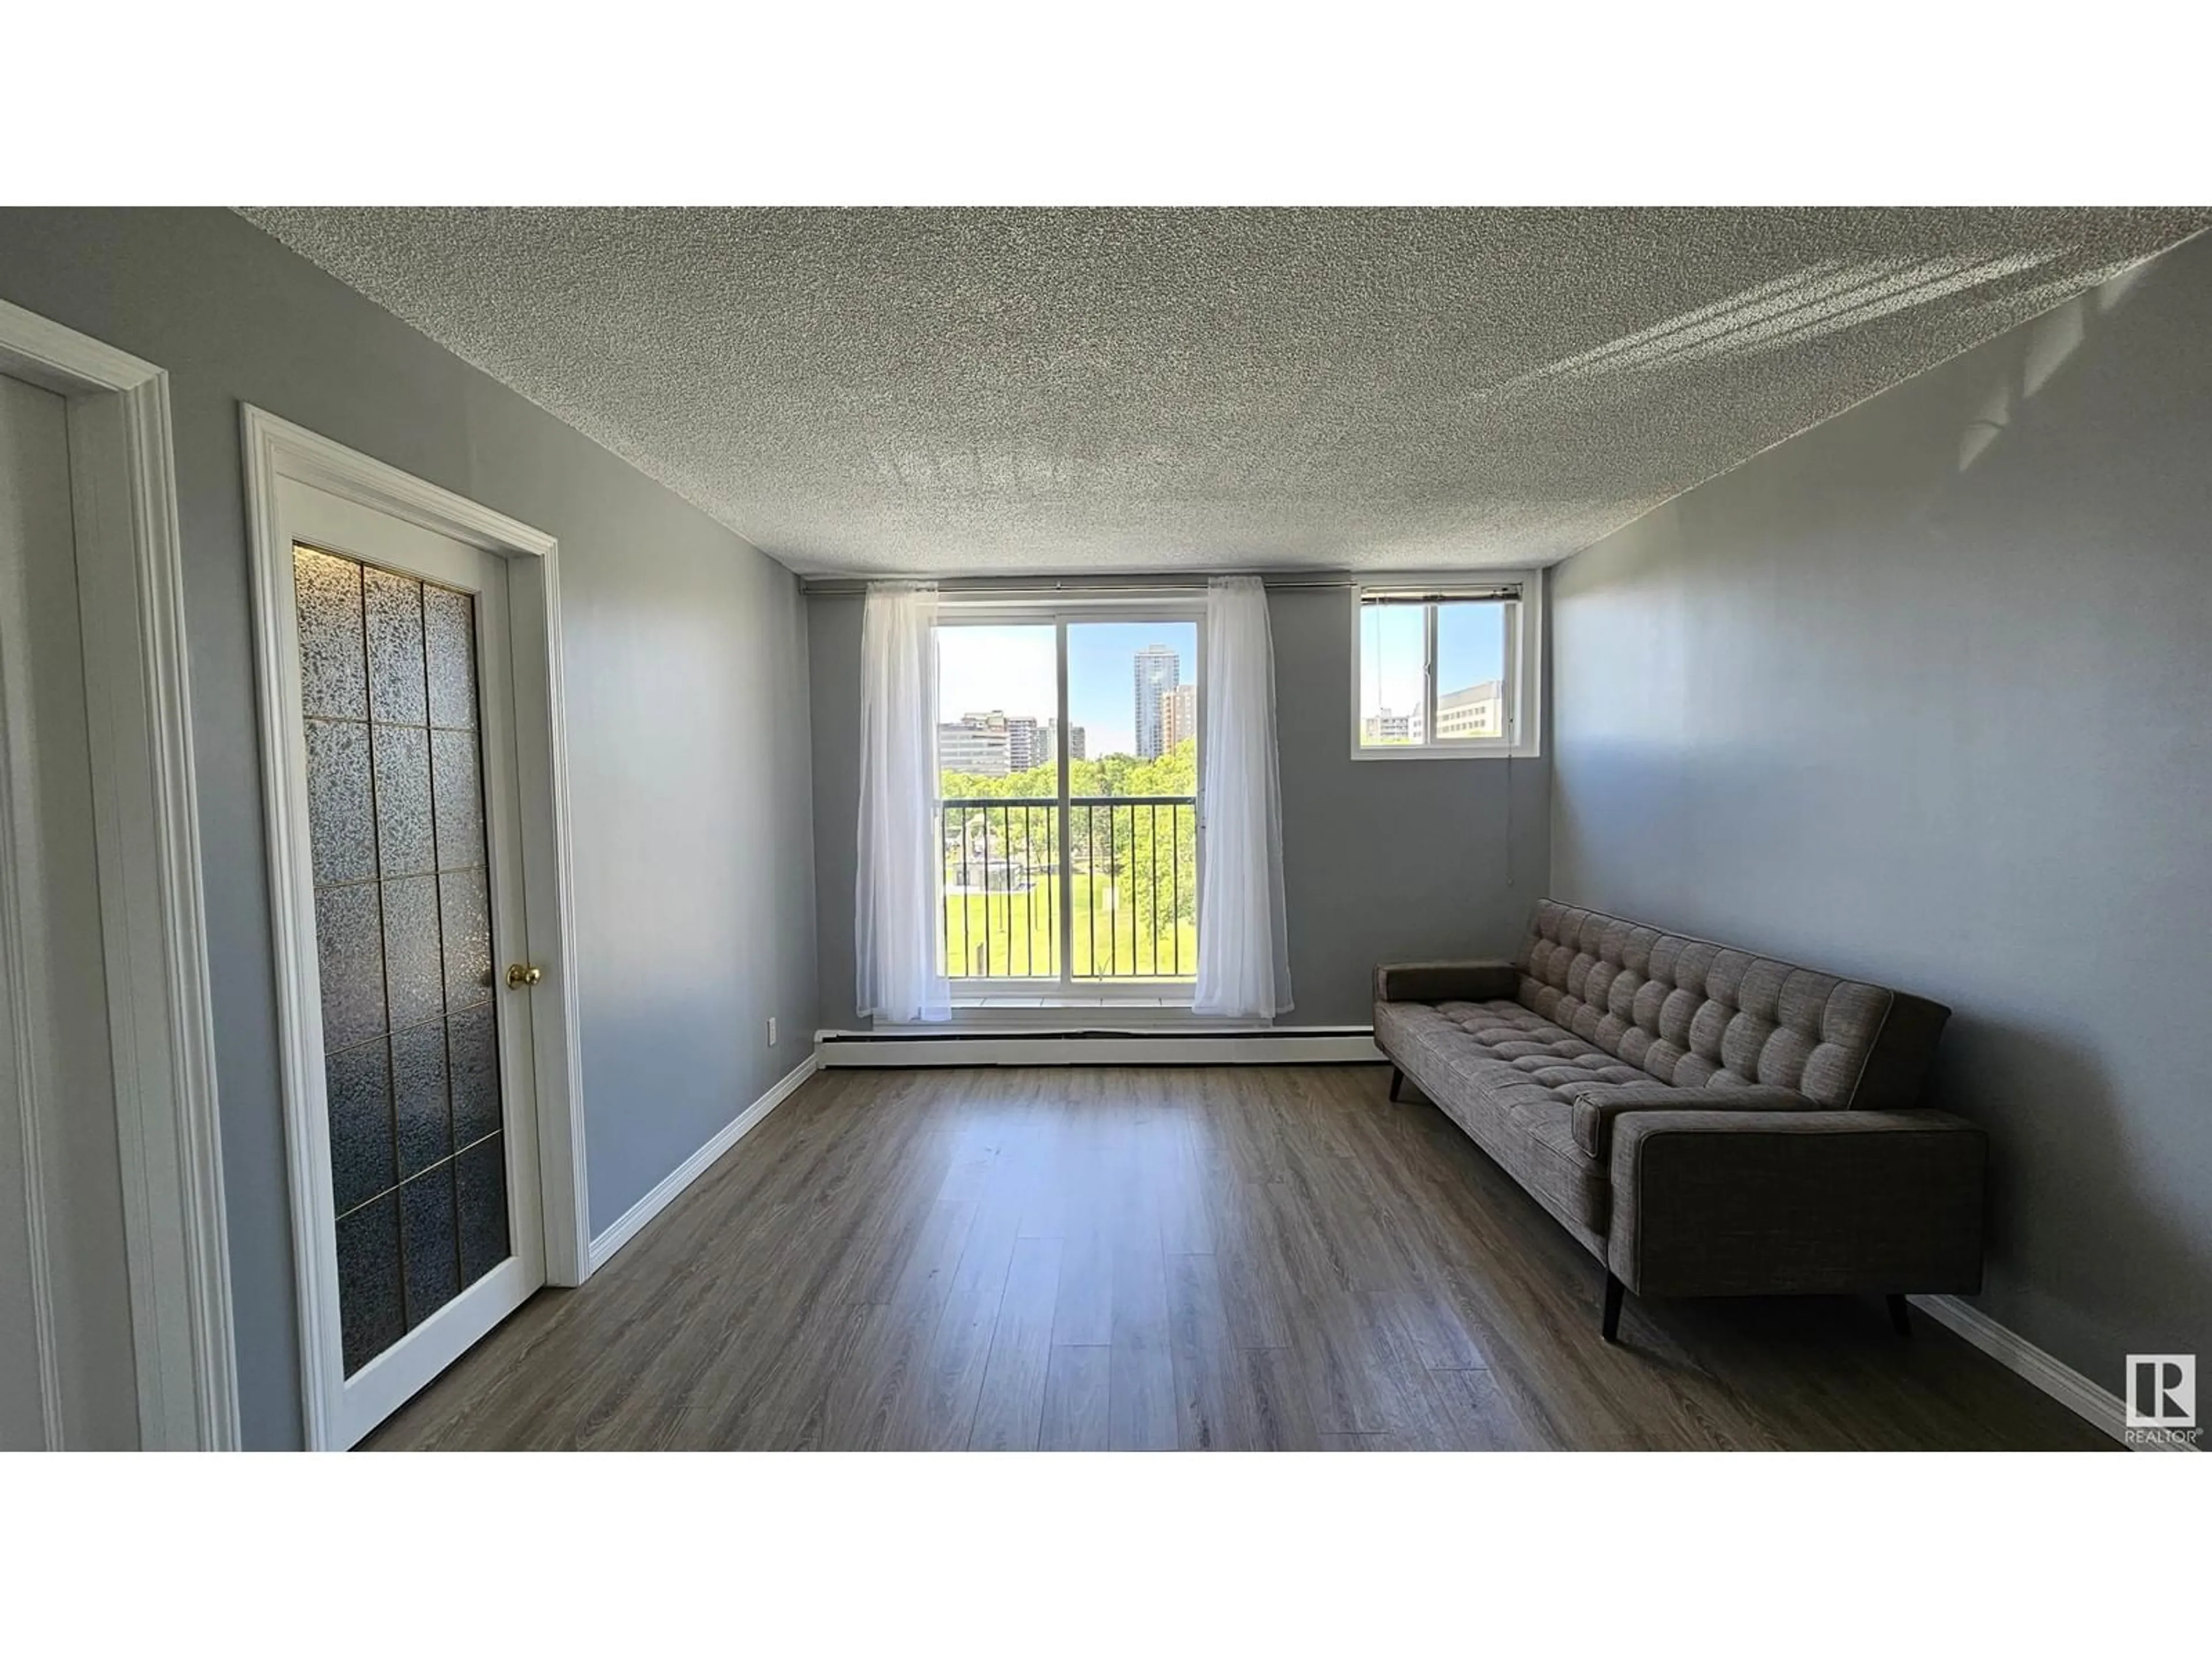 A pic of a room for #501 9730 106 ST NW, Edmonton Alberta T5K1B7